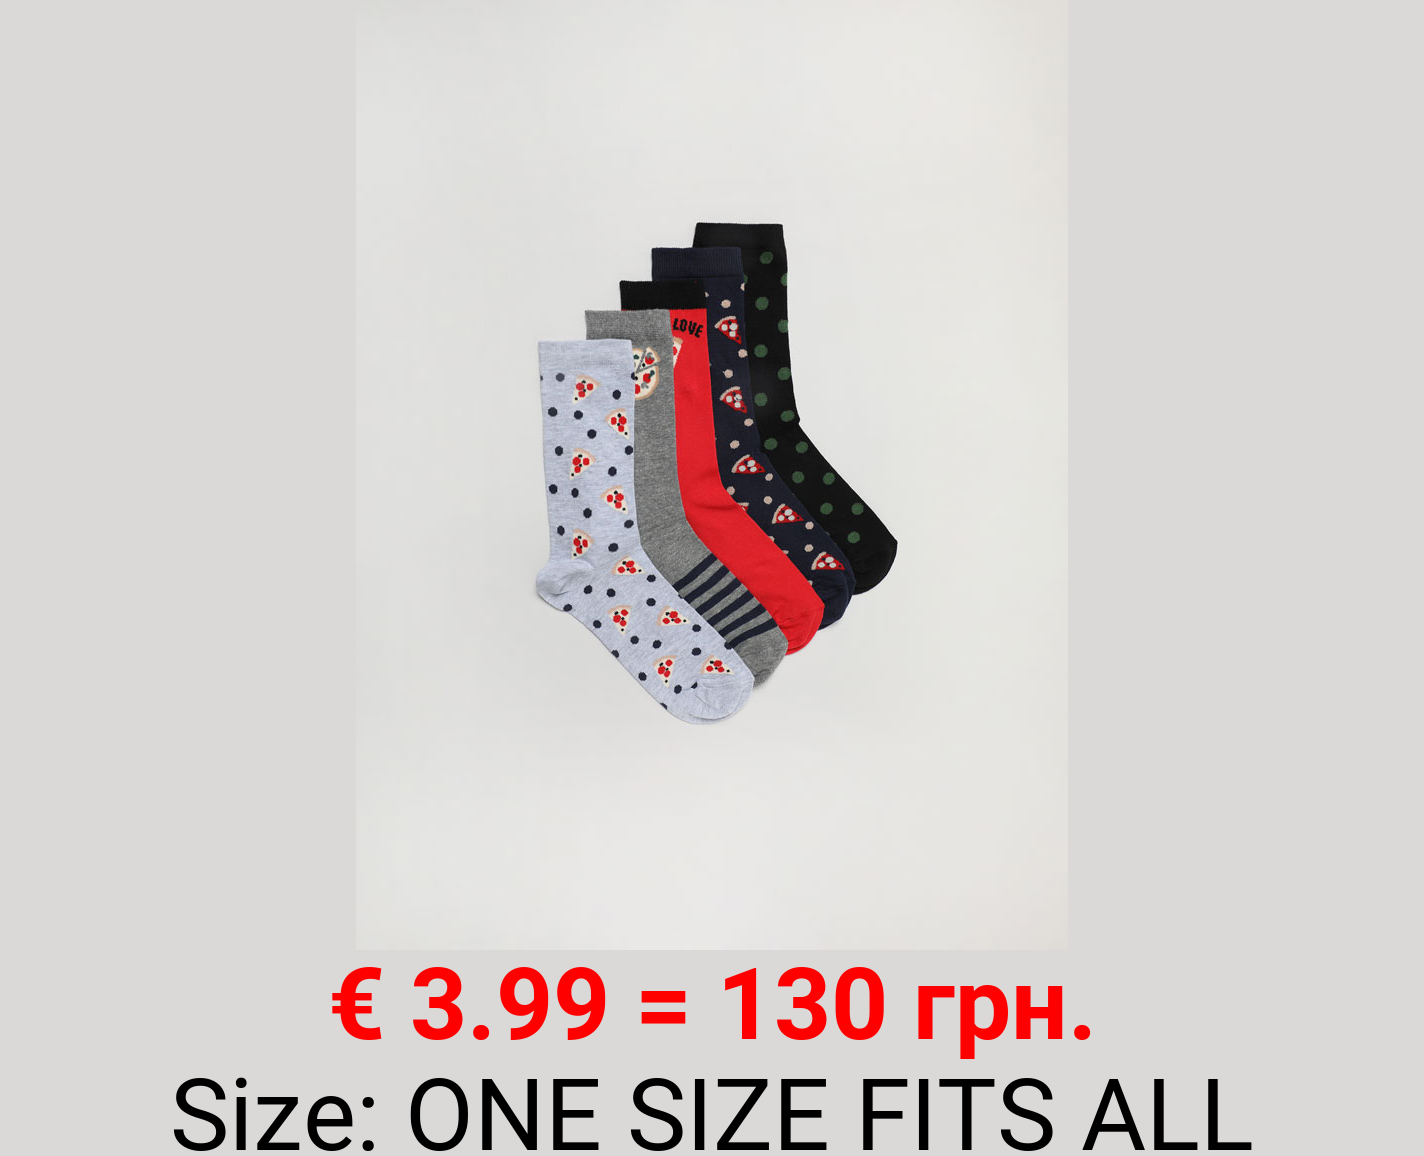 Pack of 5 pairs of socks with a pizza print